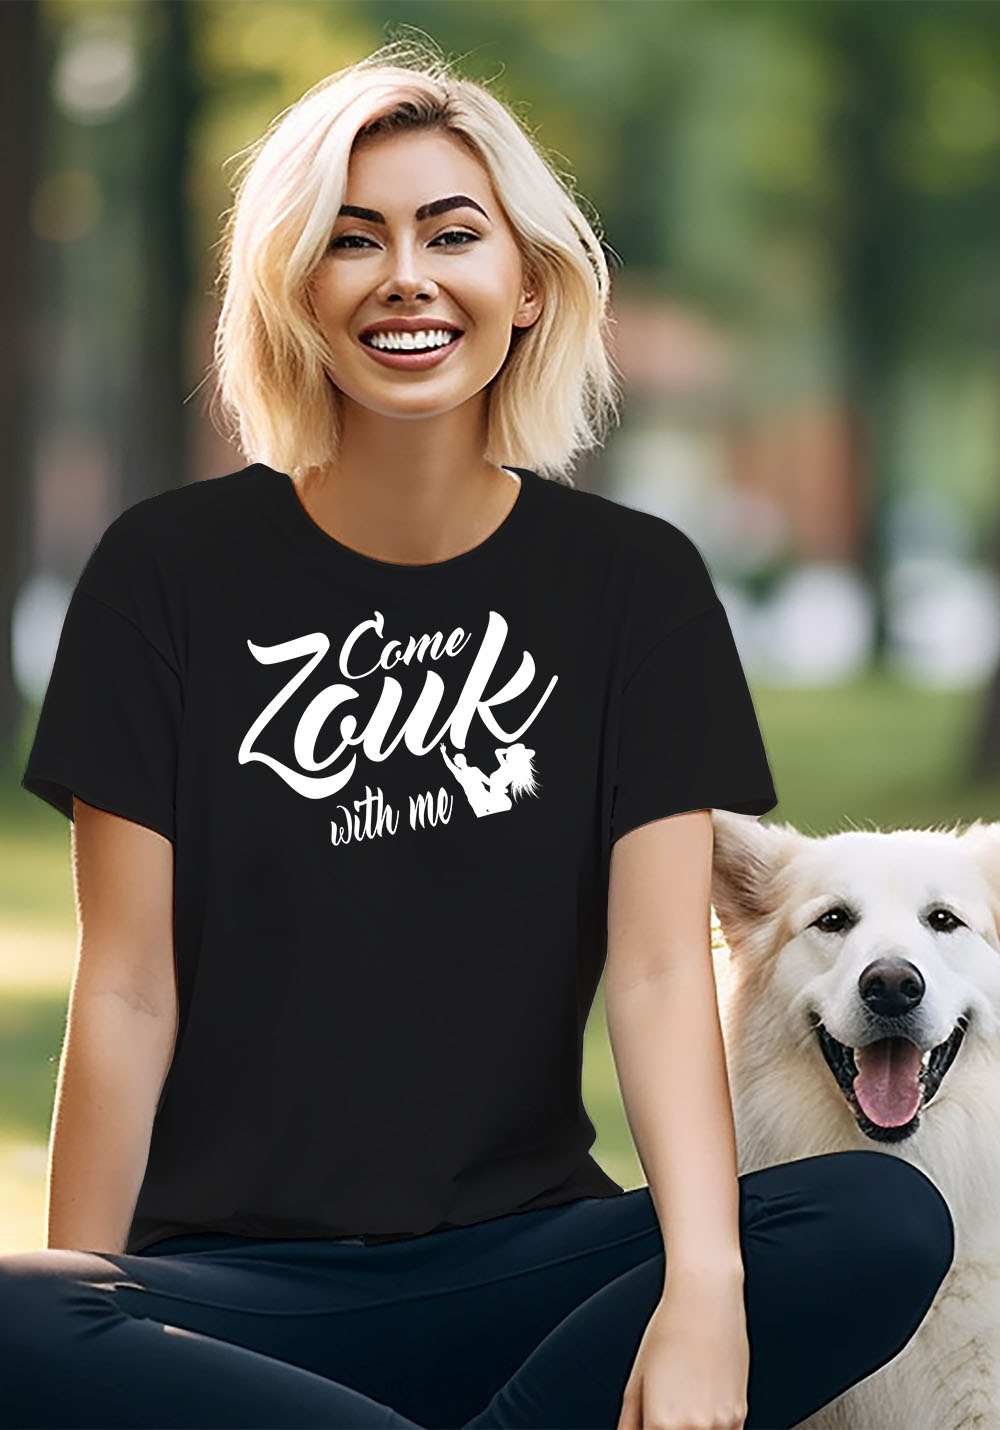 Woman wearing Zouk T-shirt decorated with unique “Come Zouk with me” design in black crew neck style